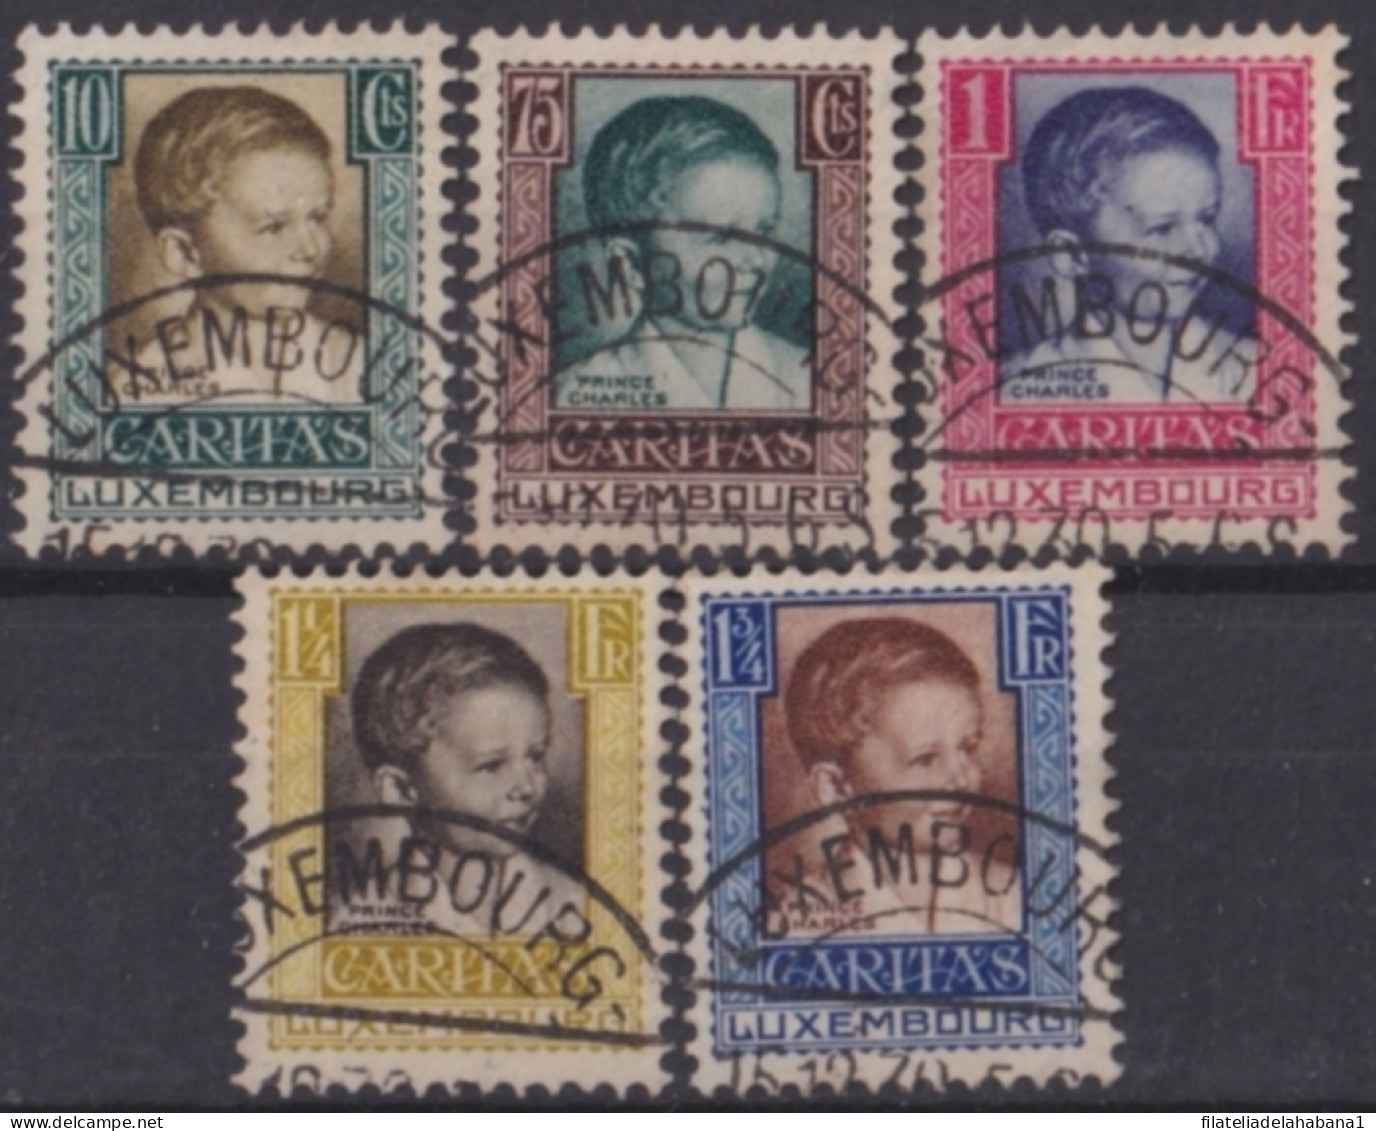 F-EX48514 LUXEMBOURG 1930 CHILD WELFARE CHILD SEMIPOSTAL USED + 50€.  - Used Stamps